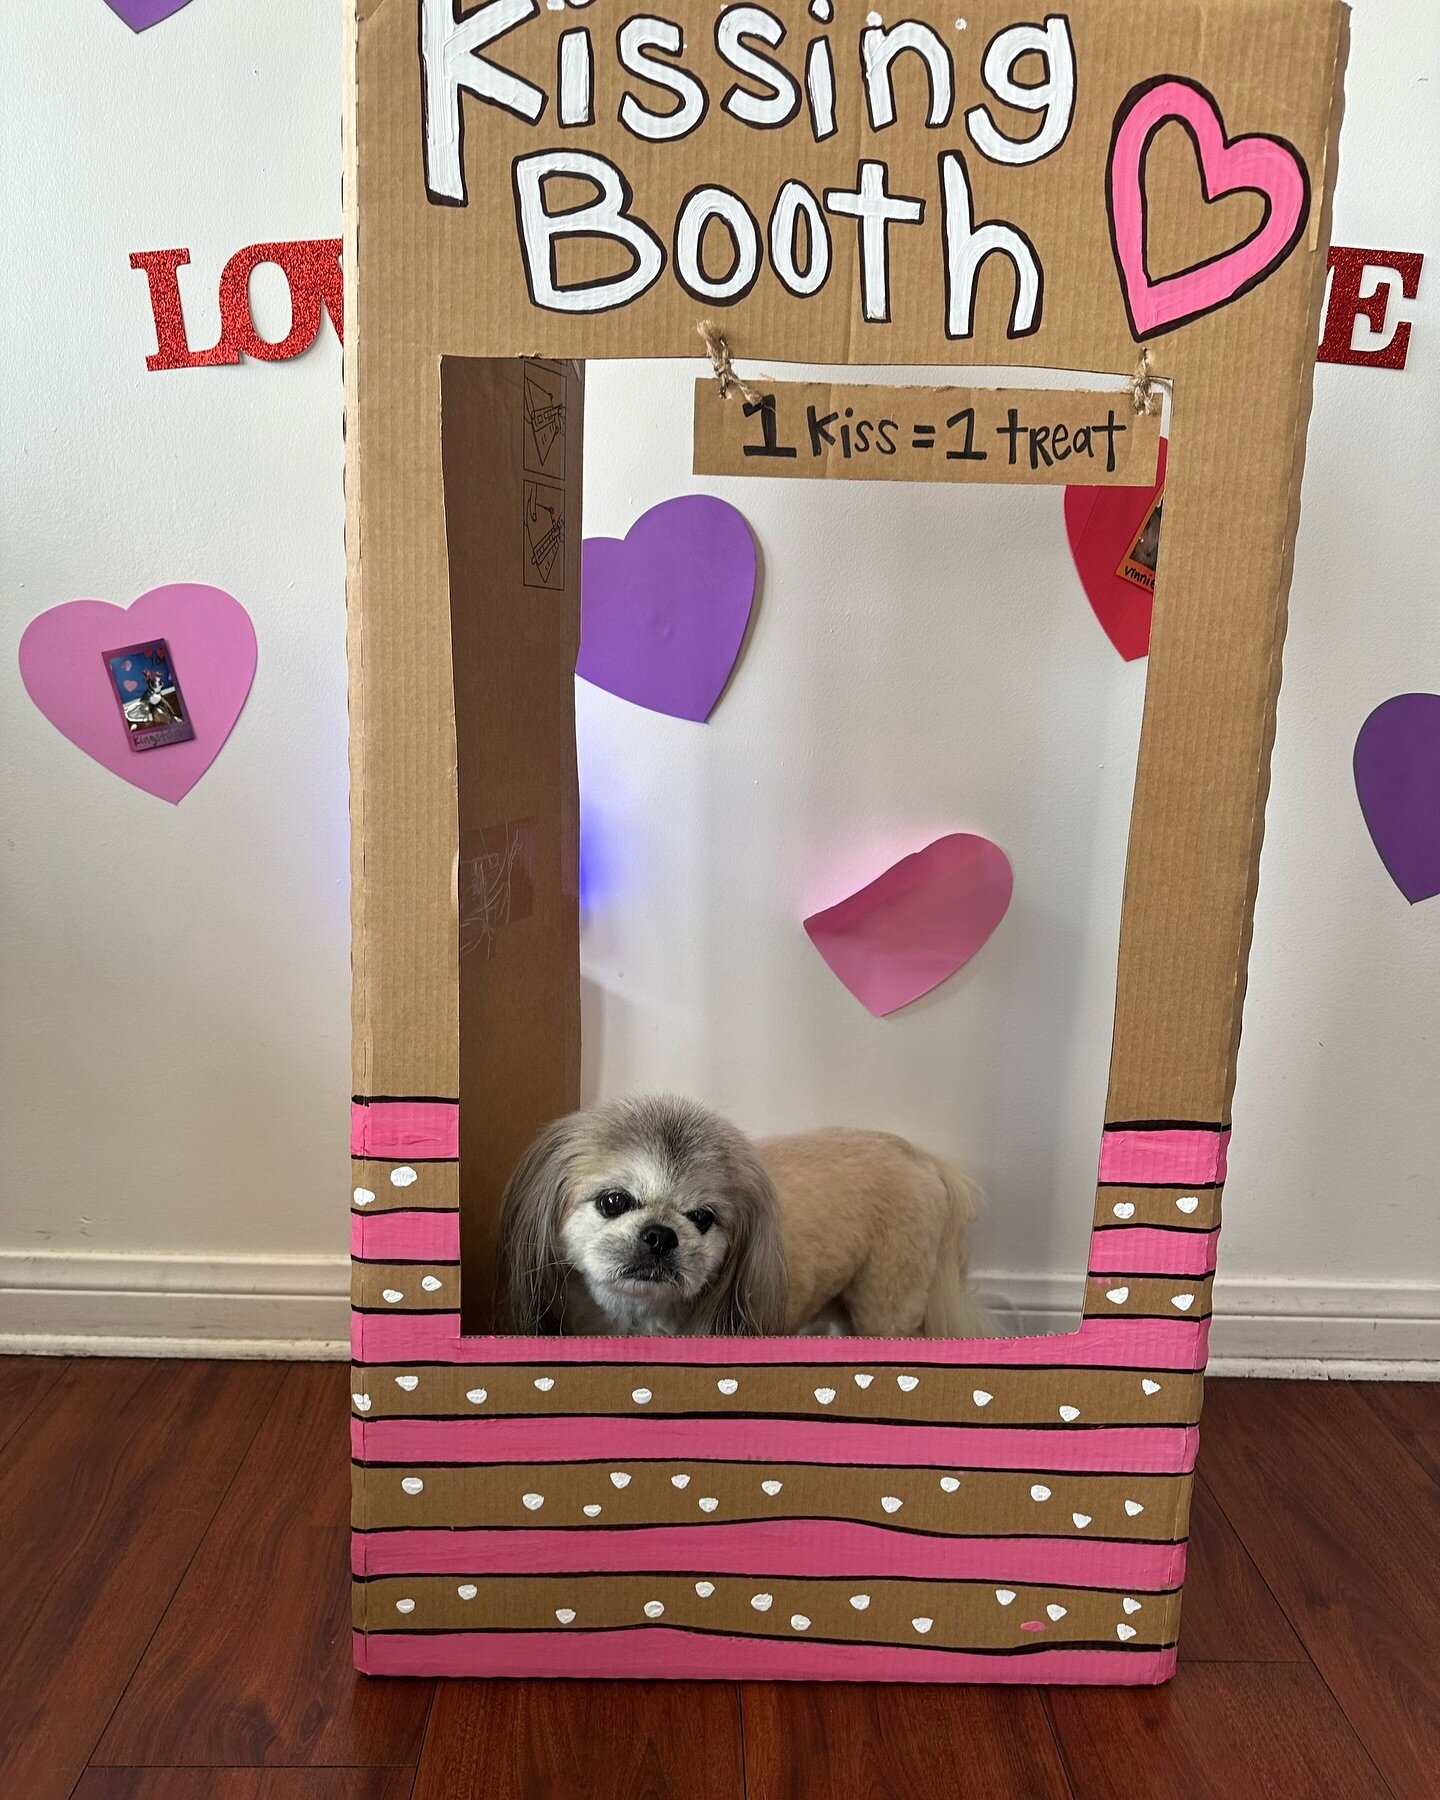 Happy LOVE Day! Sent out a little update email today! If you didn&rsquo;t get it, let me know and I will send it to you! 

Grover and I are sending you so much LOVE and KISSES! 

#loveday #hermosabeach #kissingbooth 
#groverbear